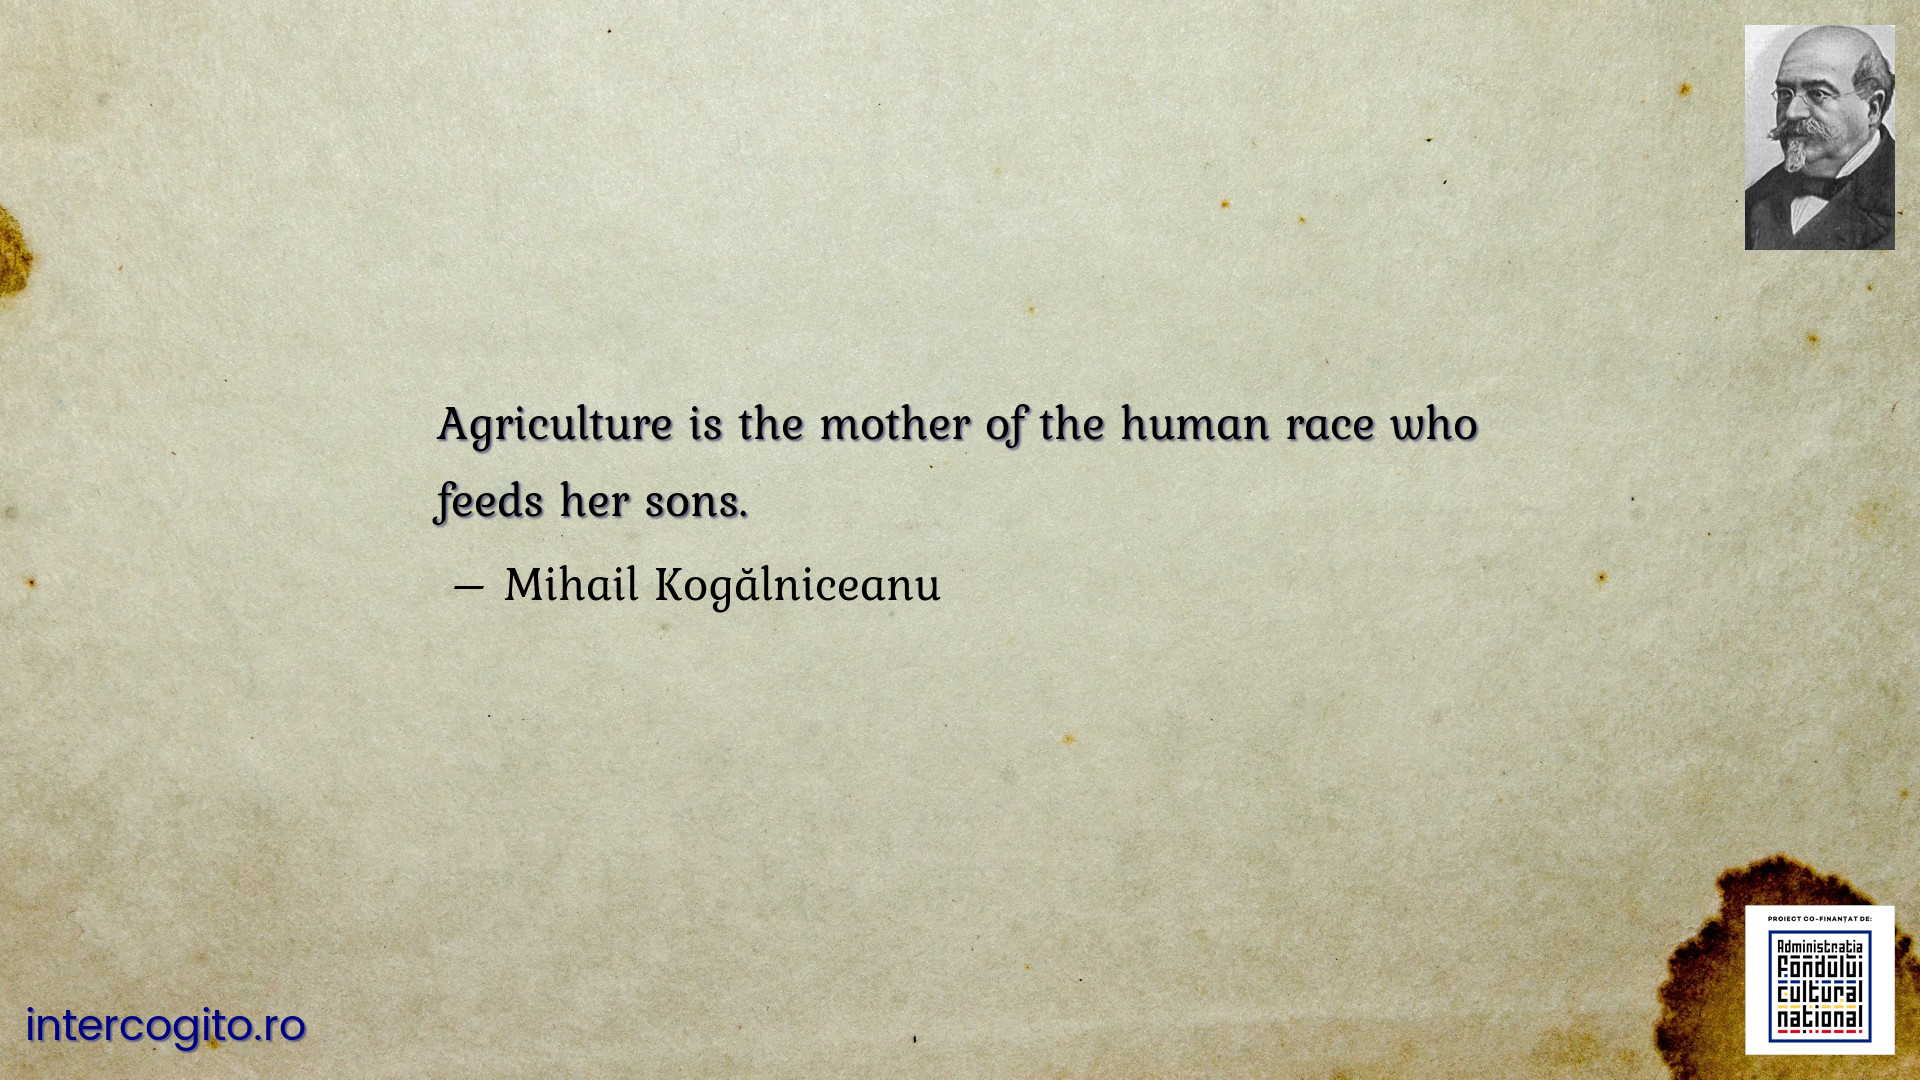 Agriculture is the mother of the human race who feeds her sons.